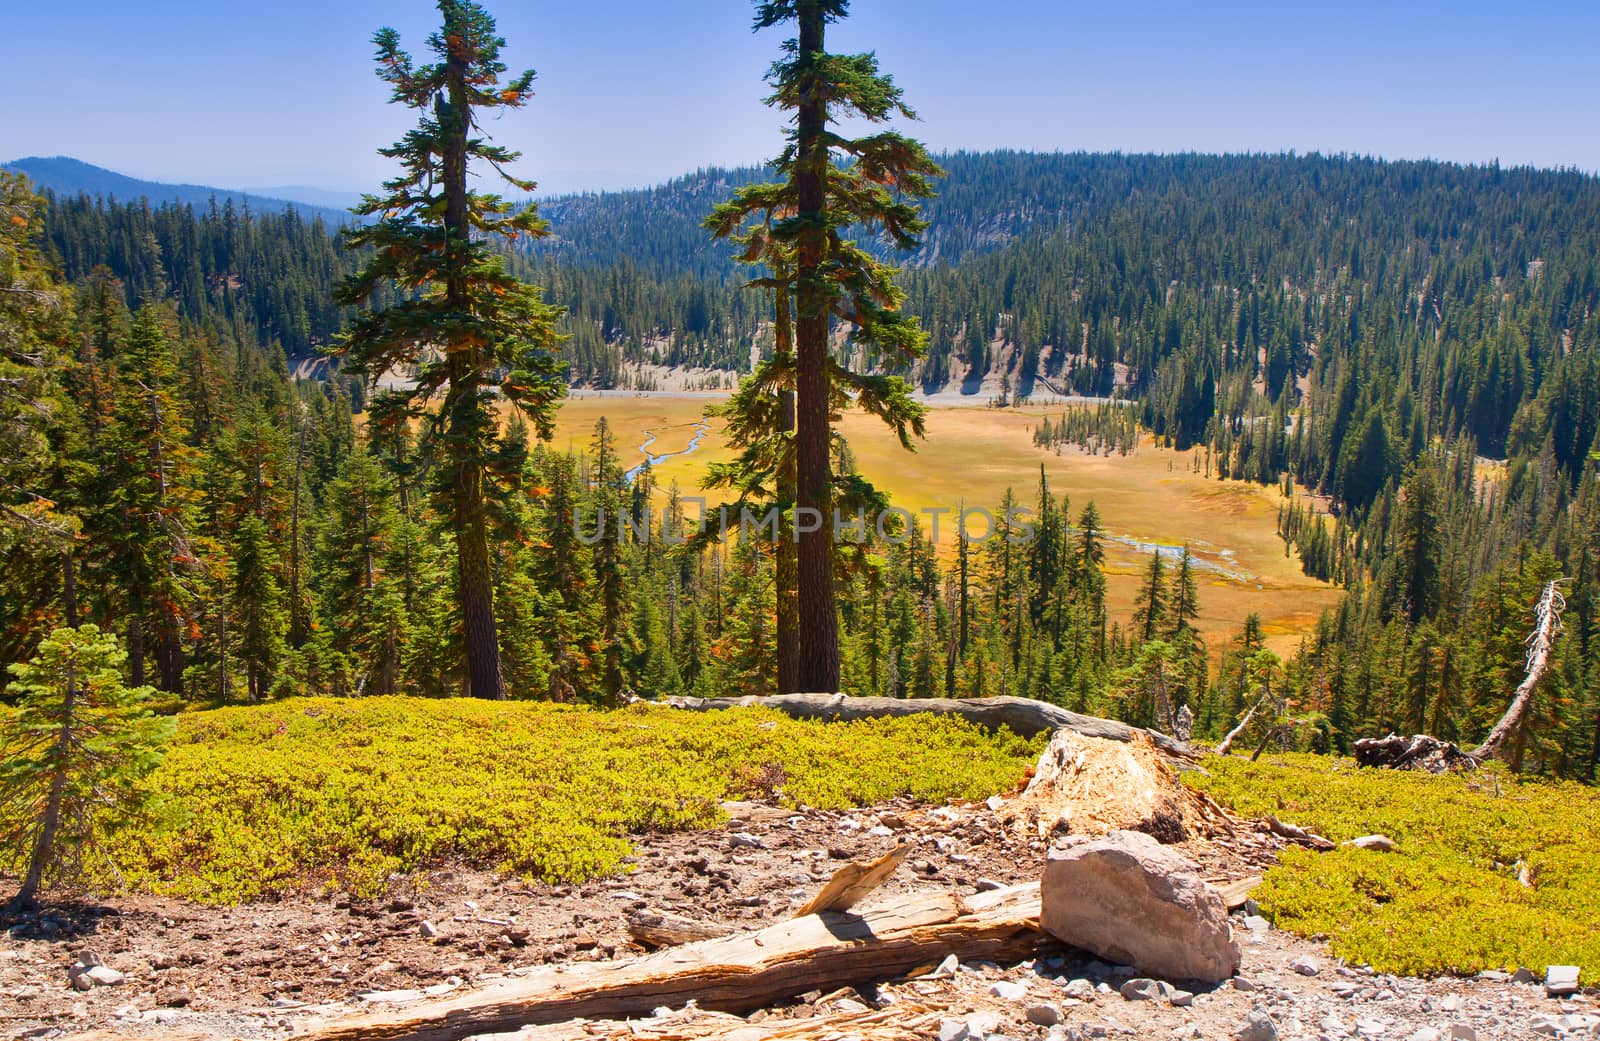 This image of Mount Lassen National Park shows beautiful hills and a valley adorned with greenery.